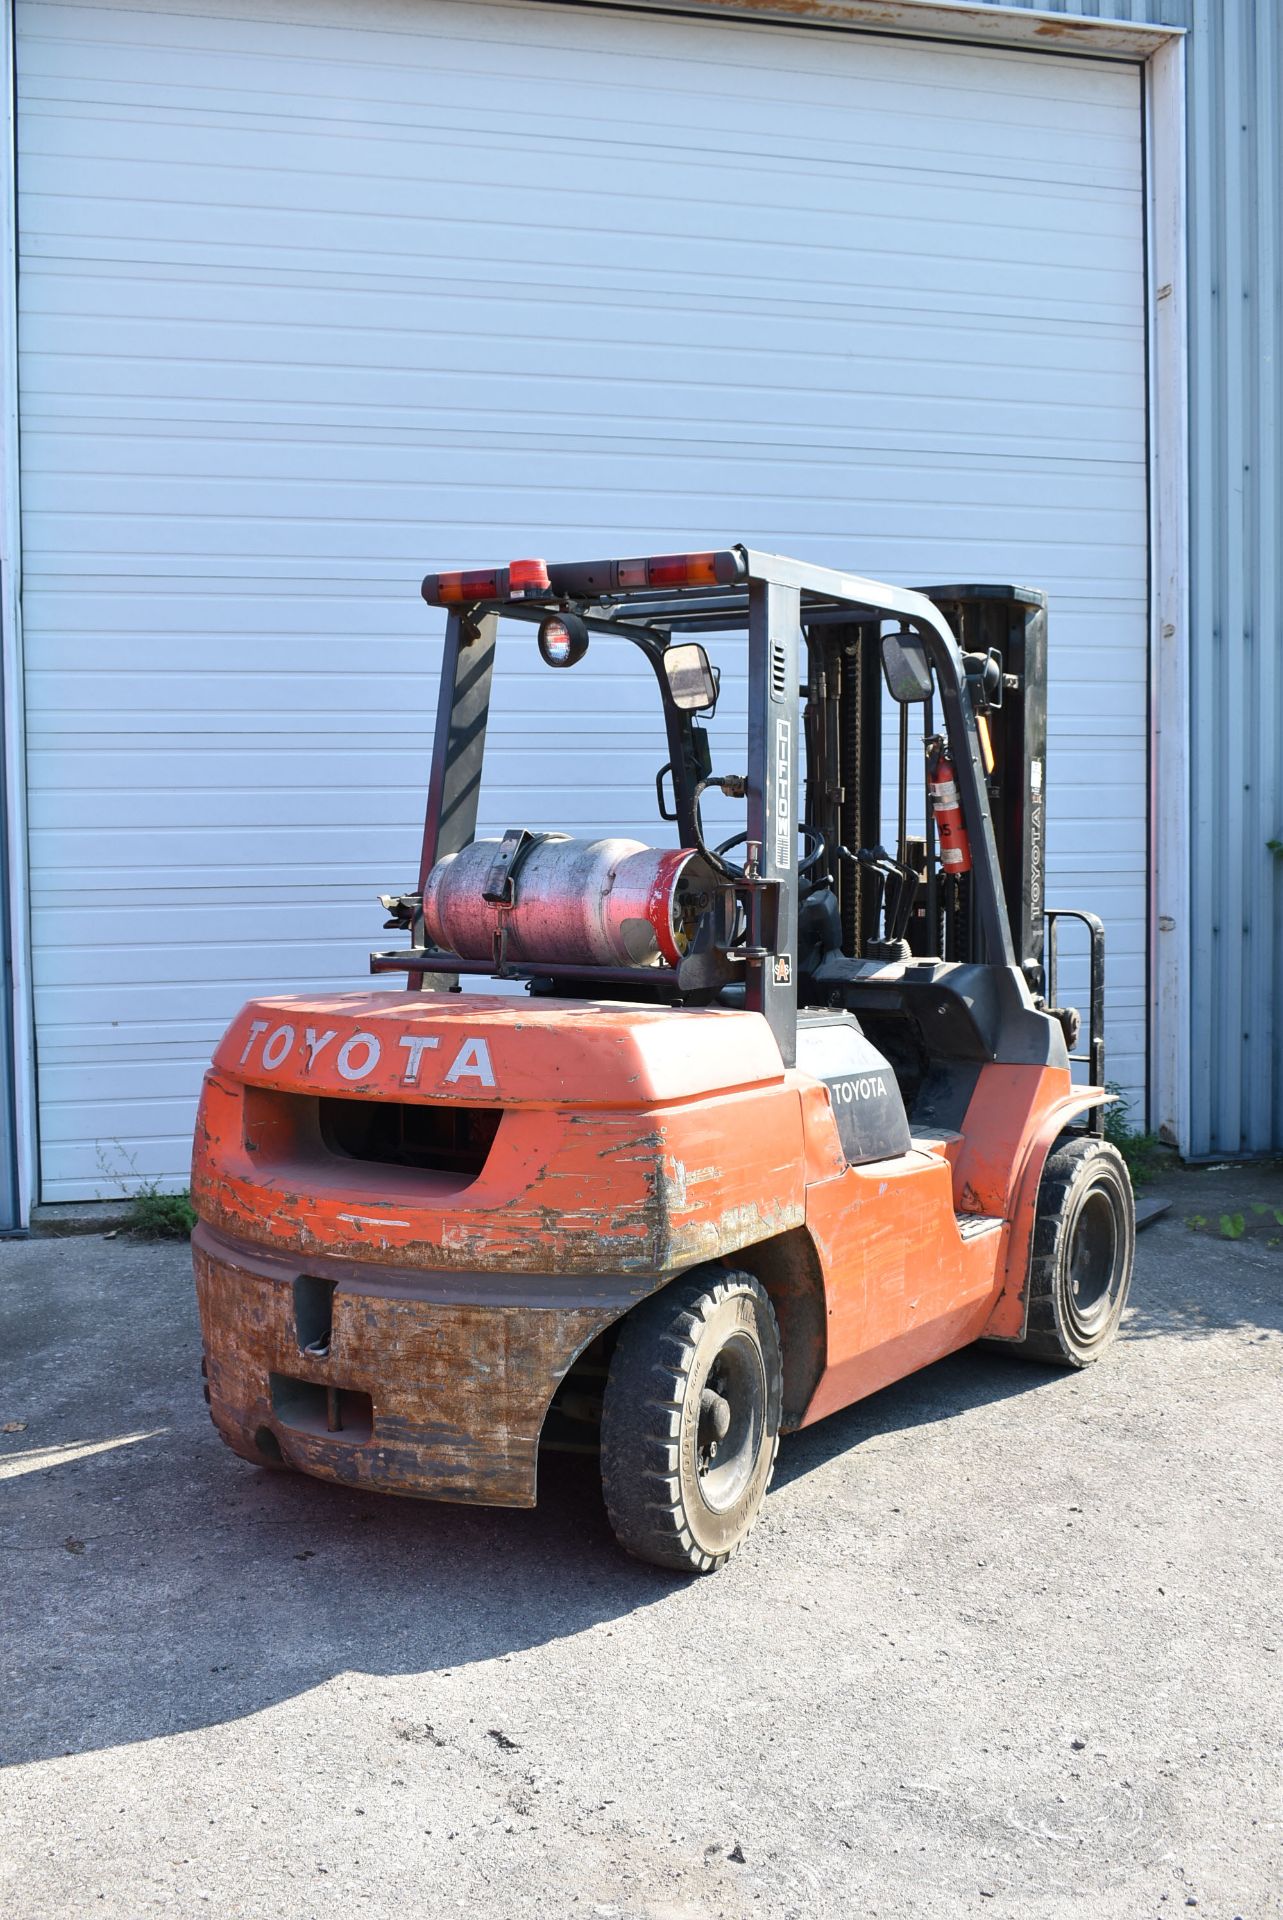 TOYOTA 35 7FGU35 7,000 LB CAPACITY LPG FORKLIFT WITH 187" MAXIMUM LIFT HEIGHT, 3-STAGE MAST, SIDE - Image 3 of 9